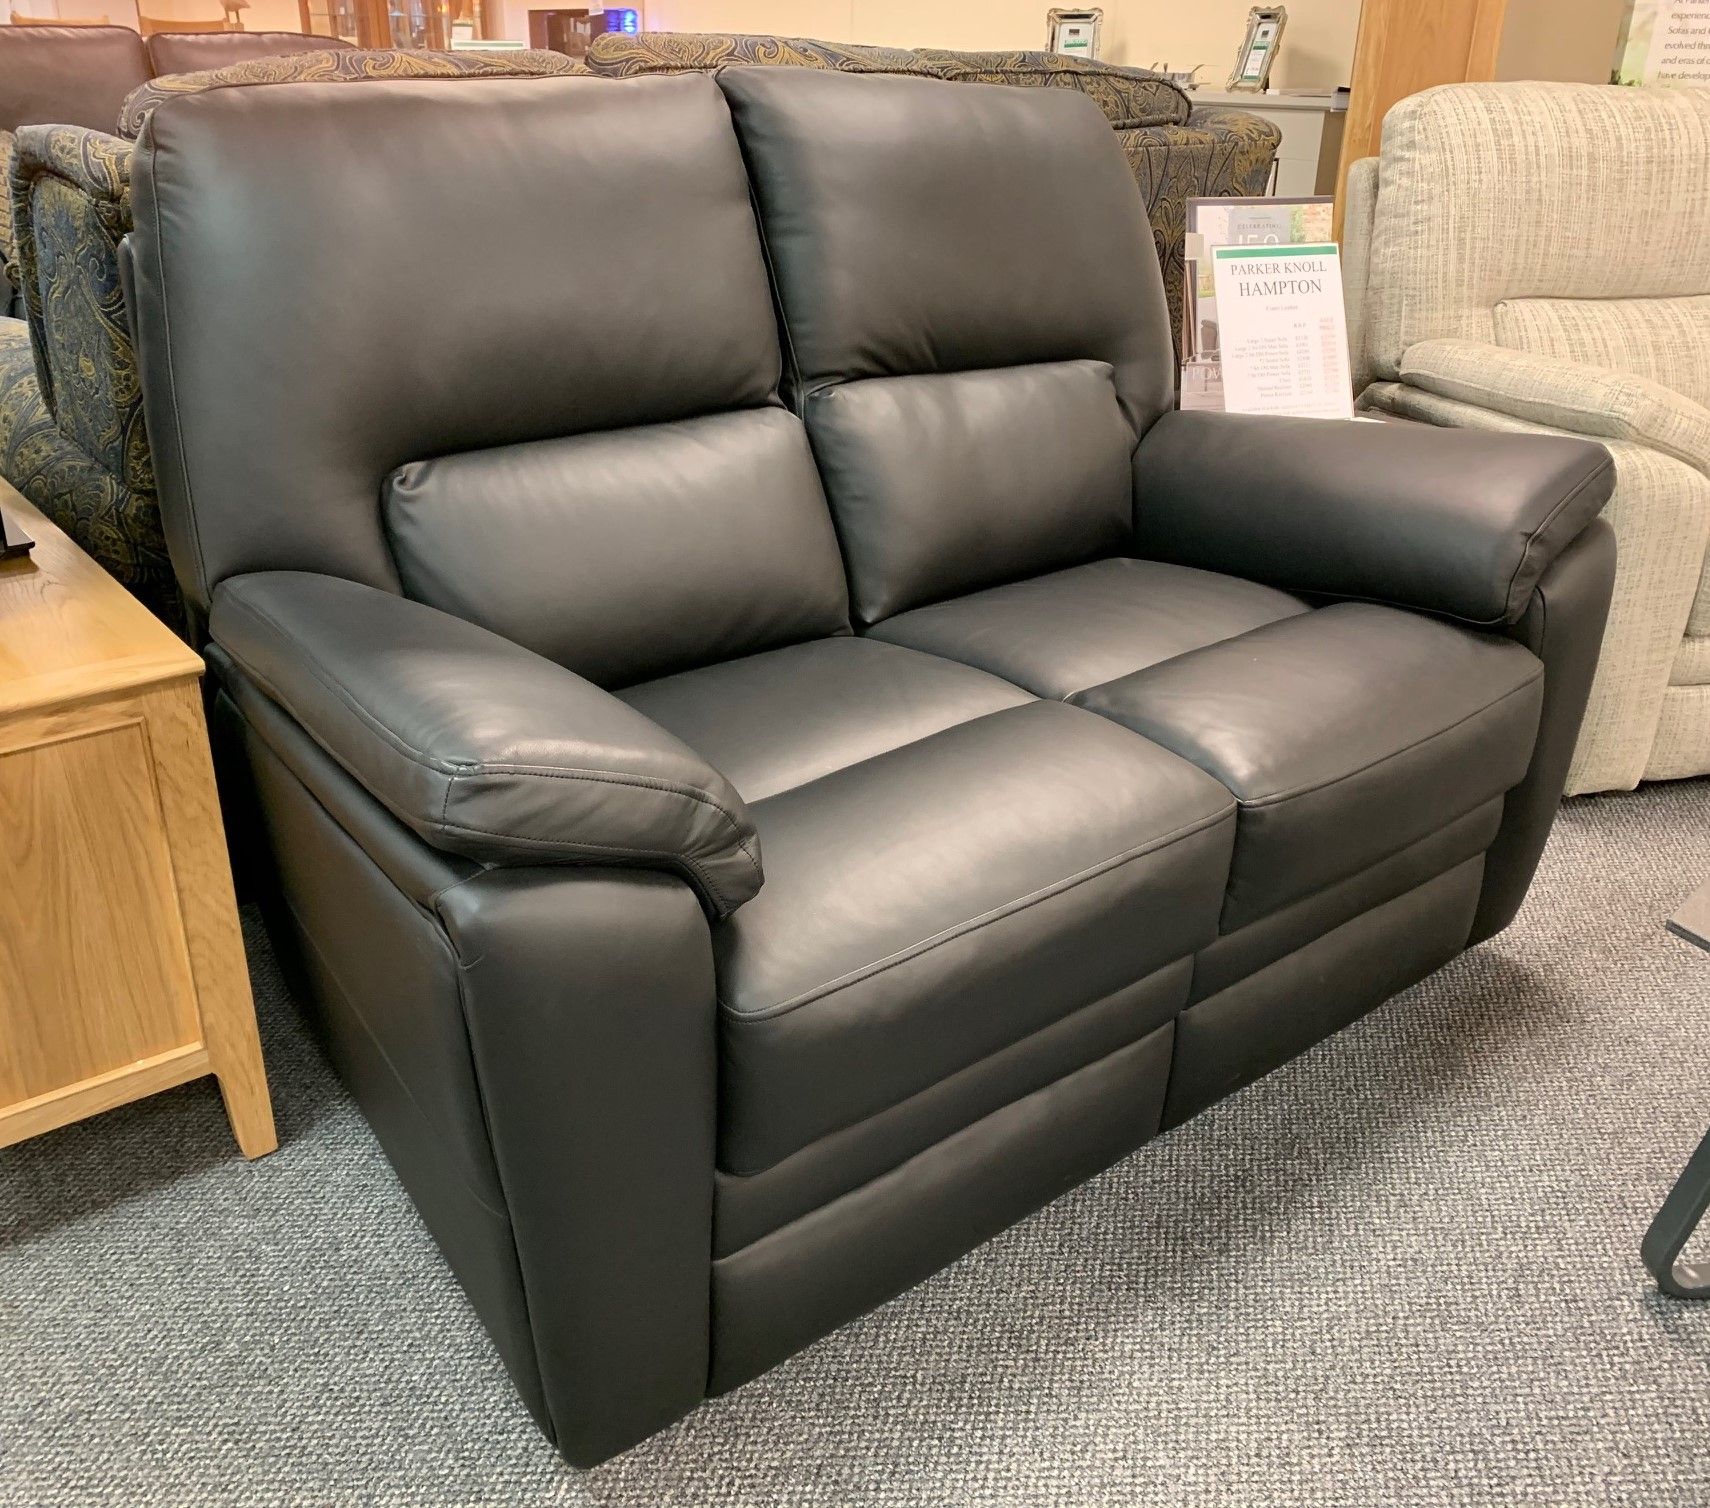 2 Seater Fixed Sofa In Leather Sofas, Leather Couch Clearance